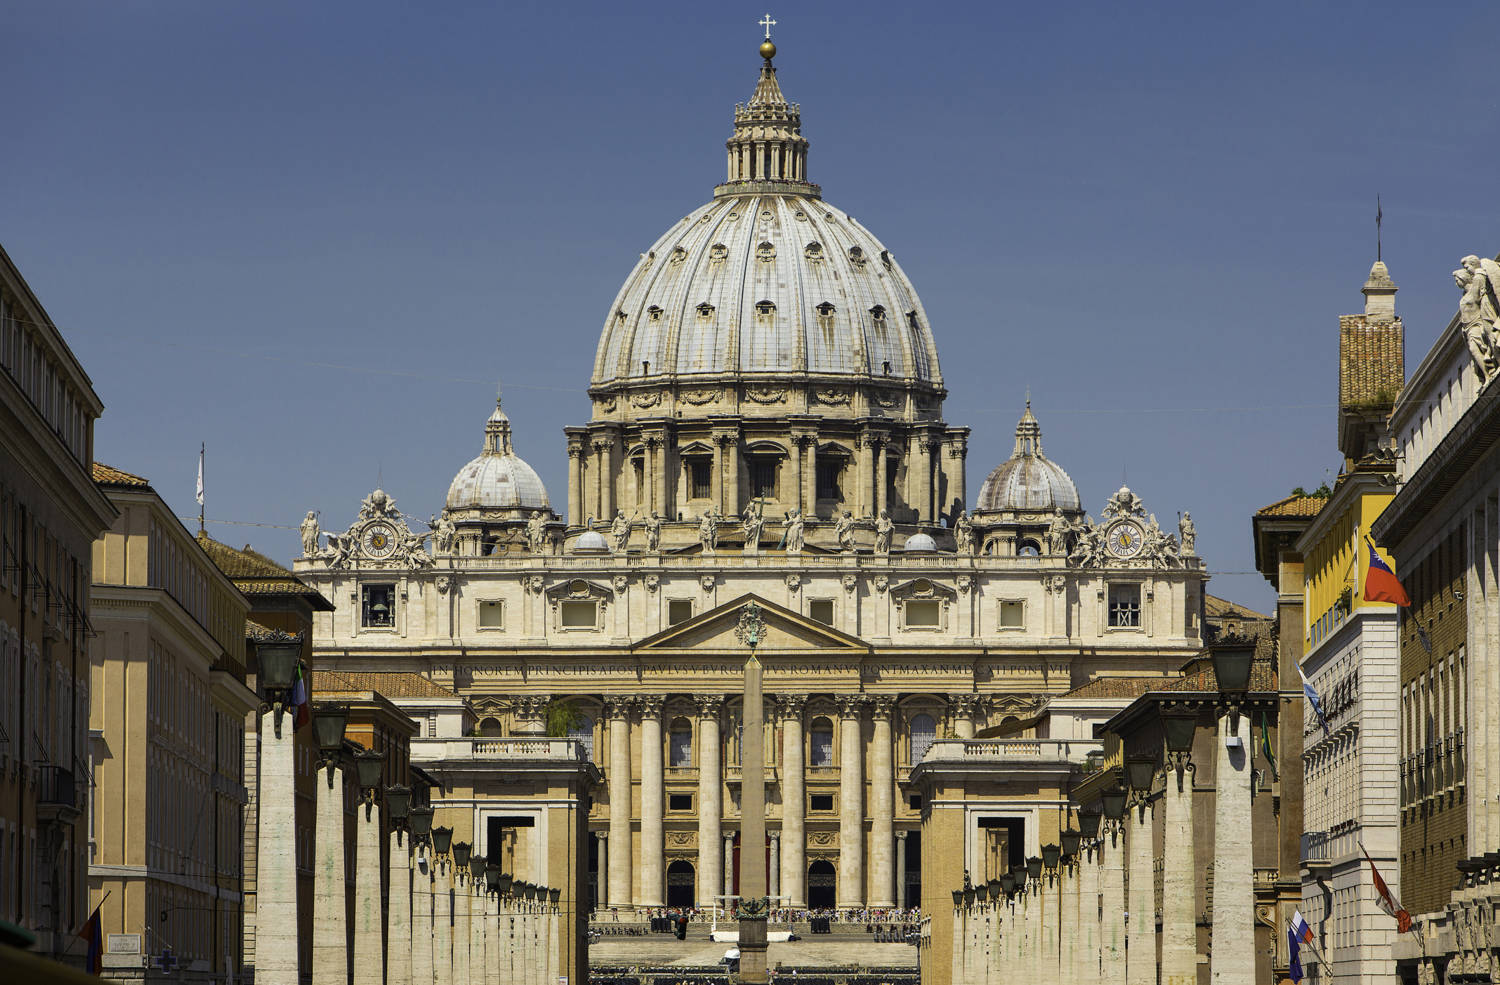 Vatican with St Peter's Basilica, Rome, Italy. Photo: Getty Images